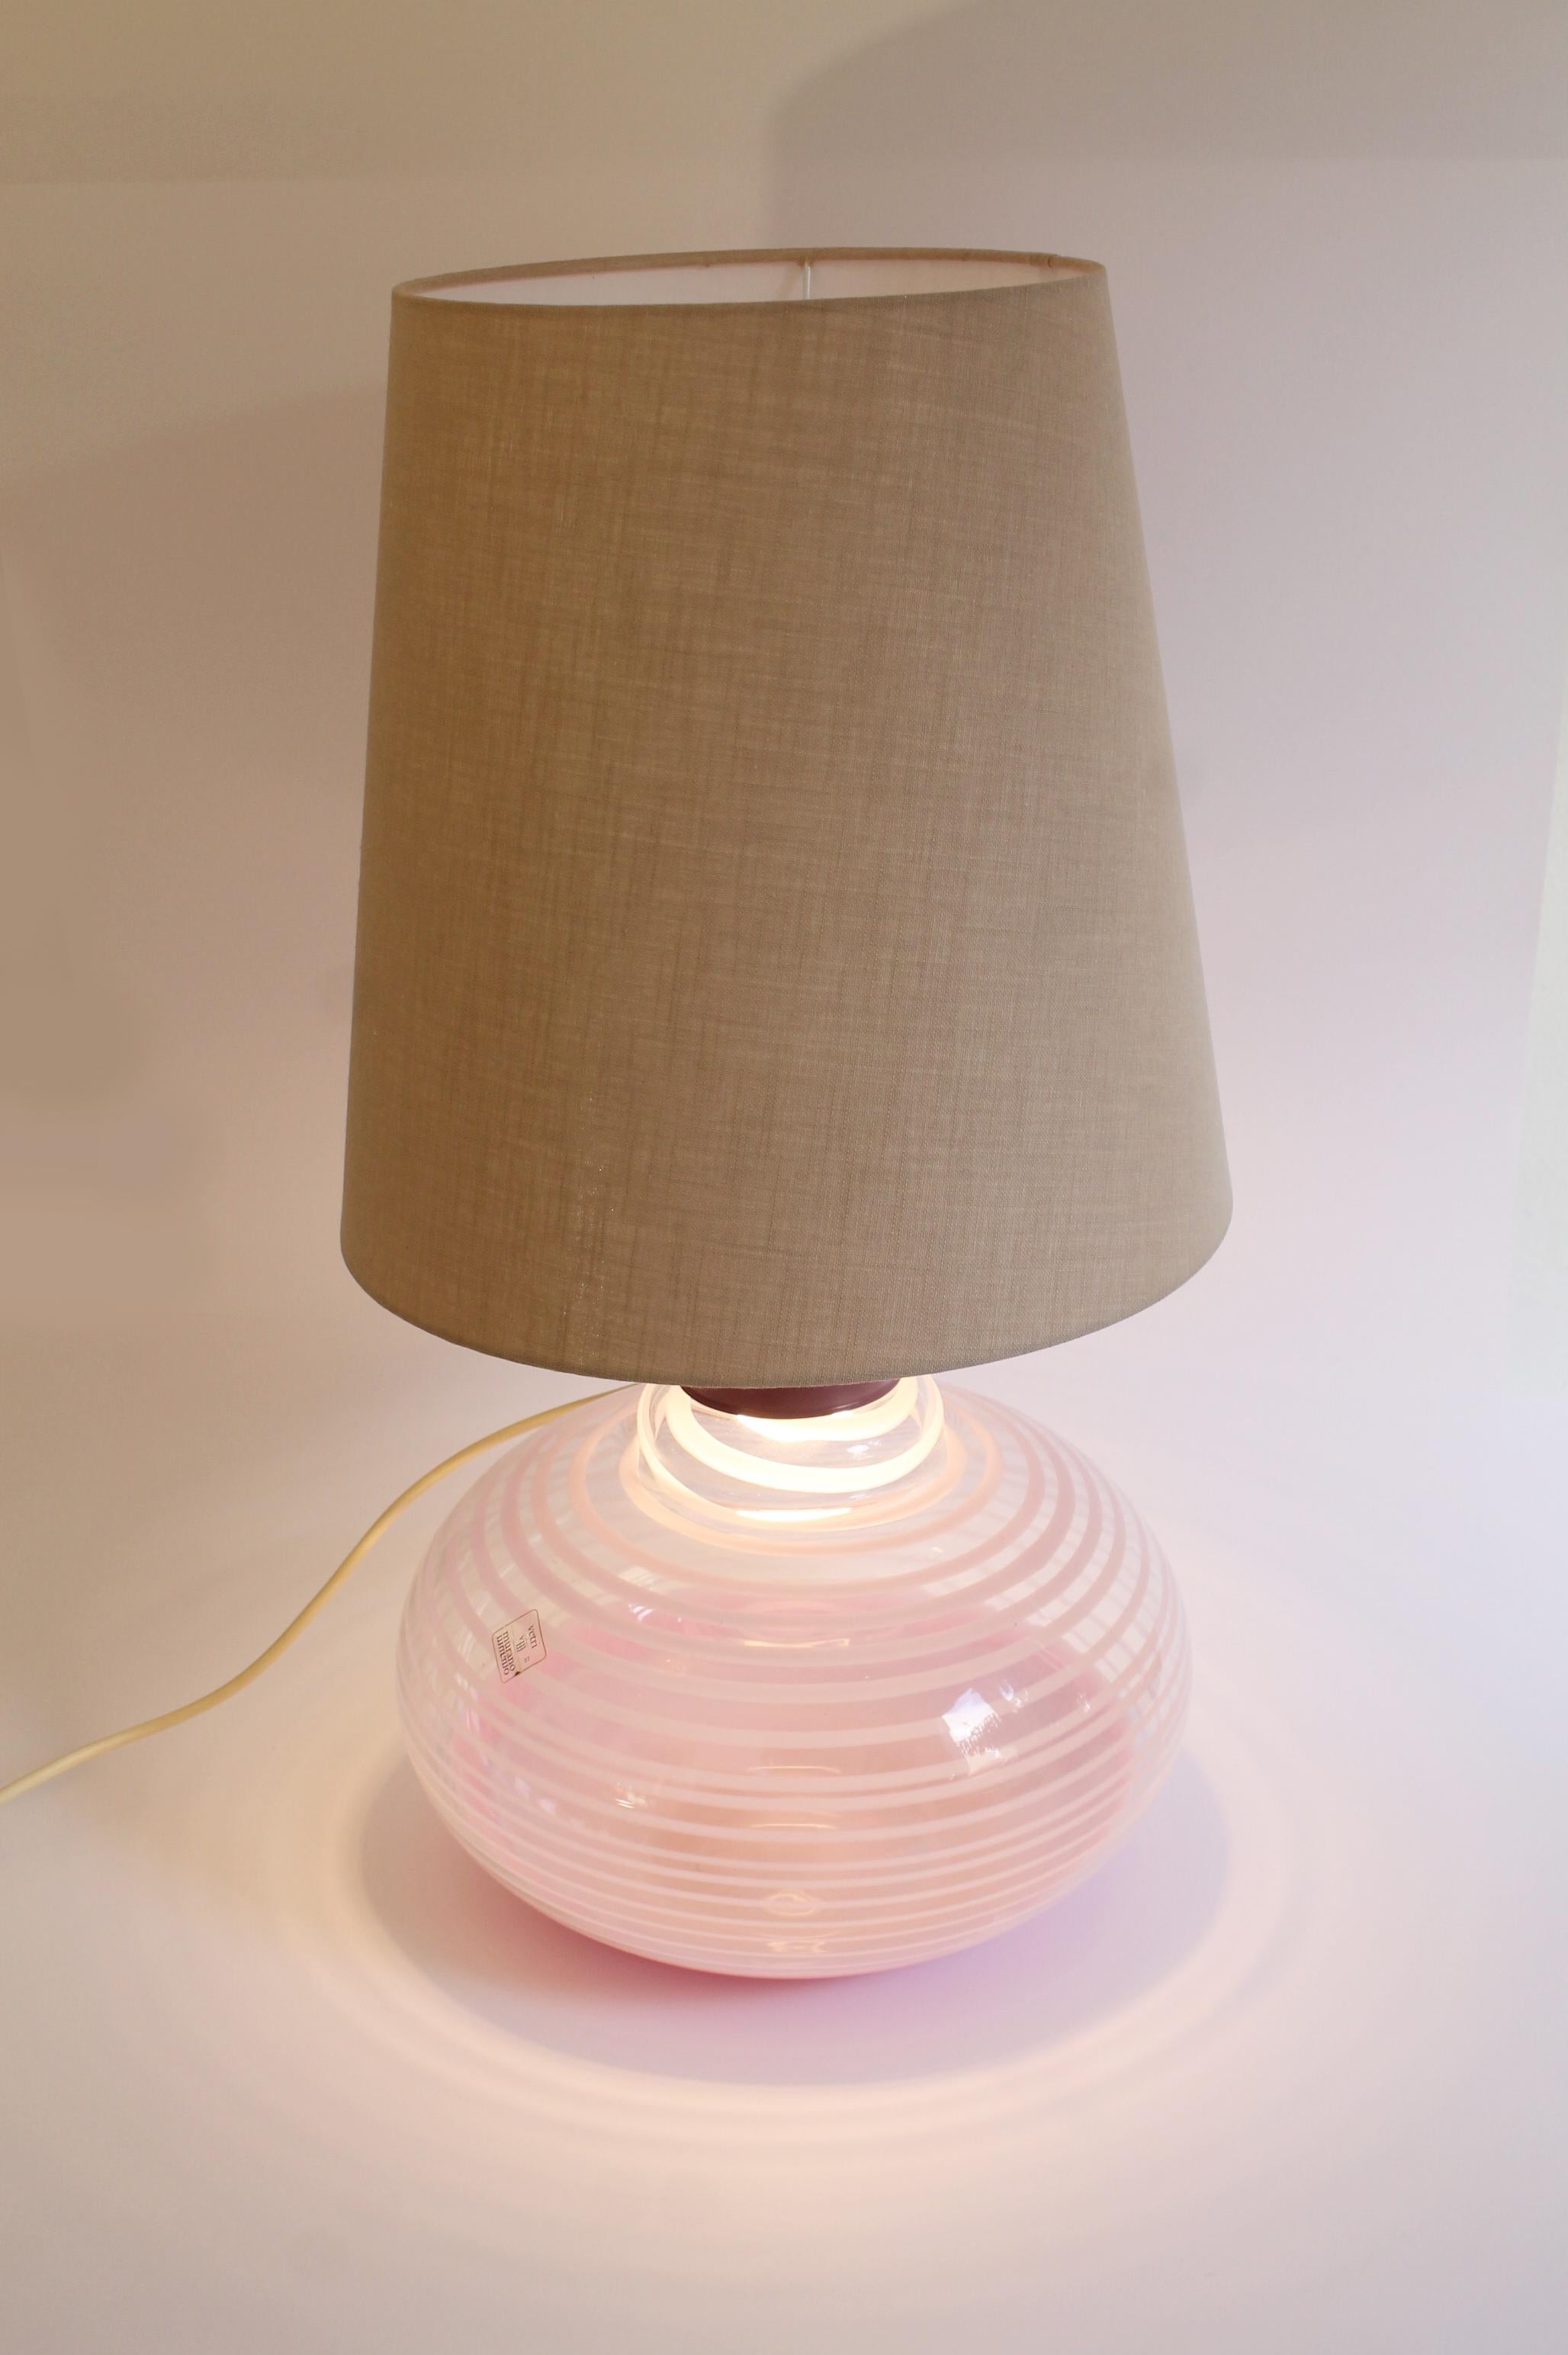 Large VENINI Murano glass table lampshade (66x33x33cm) Italy, 1960s. Rare find! For Sale 2